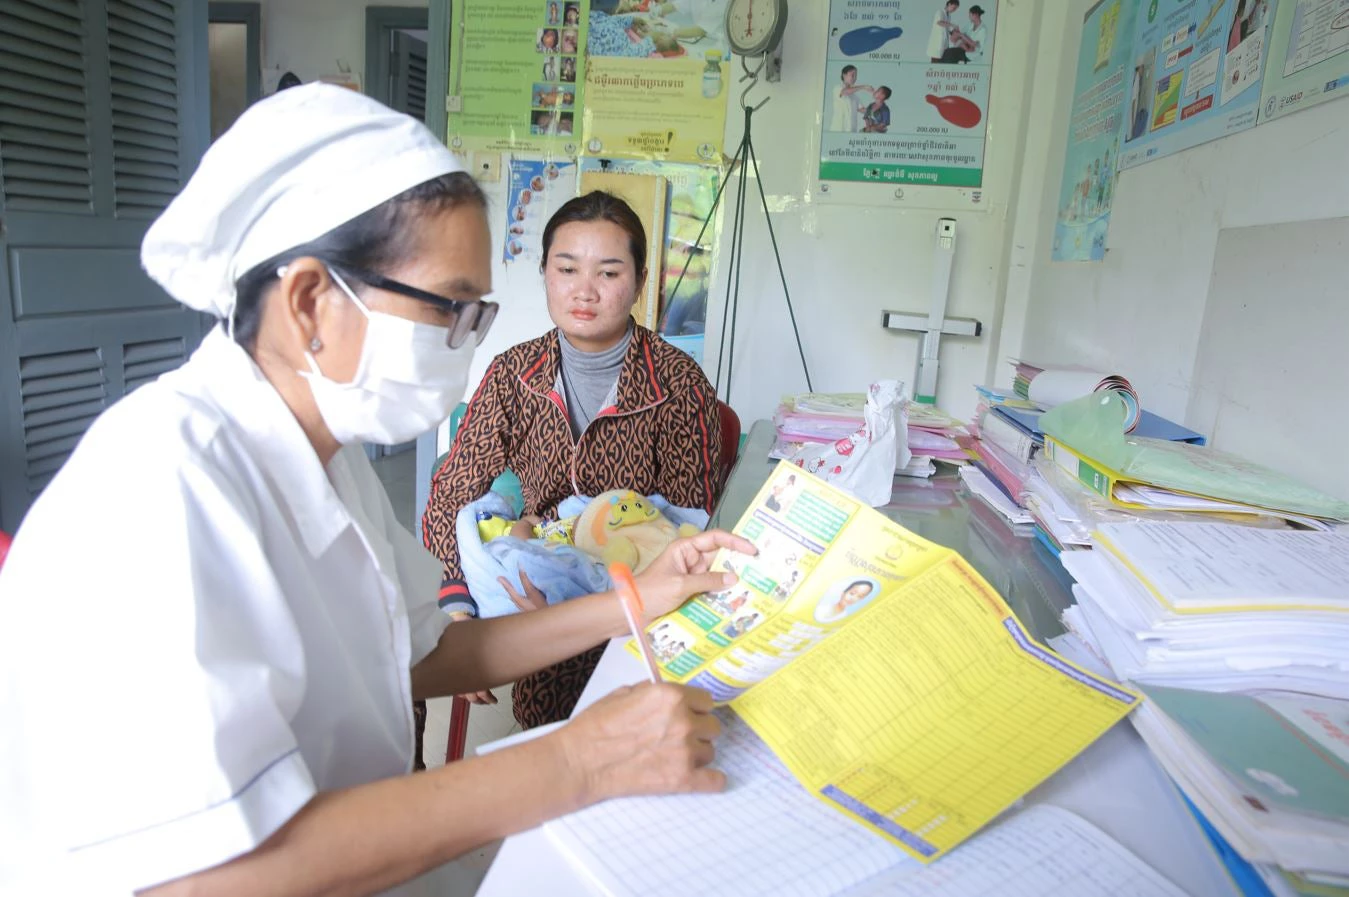 Family planning services are offered to patience at the Banlong Health Center in Chey Chumnas village in Ratanakiri province. (Photo: Dominic Chavez/Global Financing Facility)